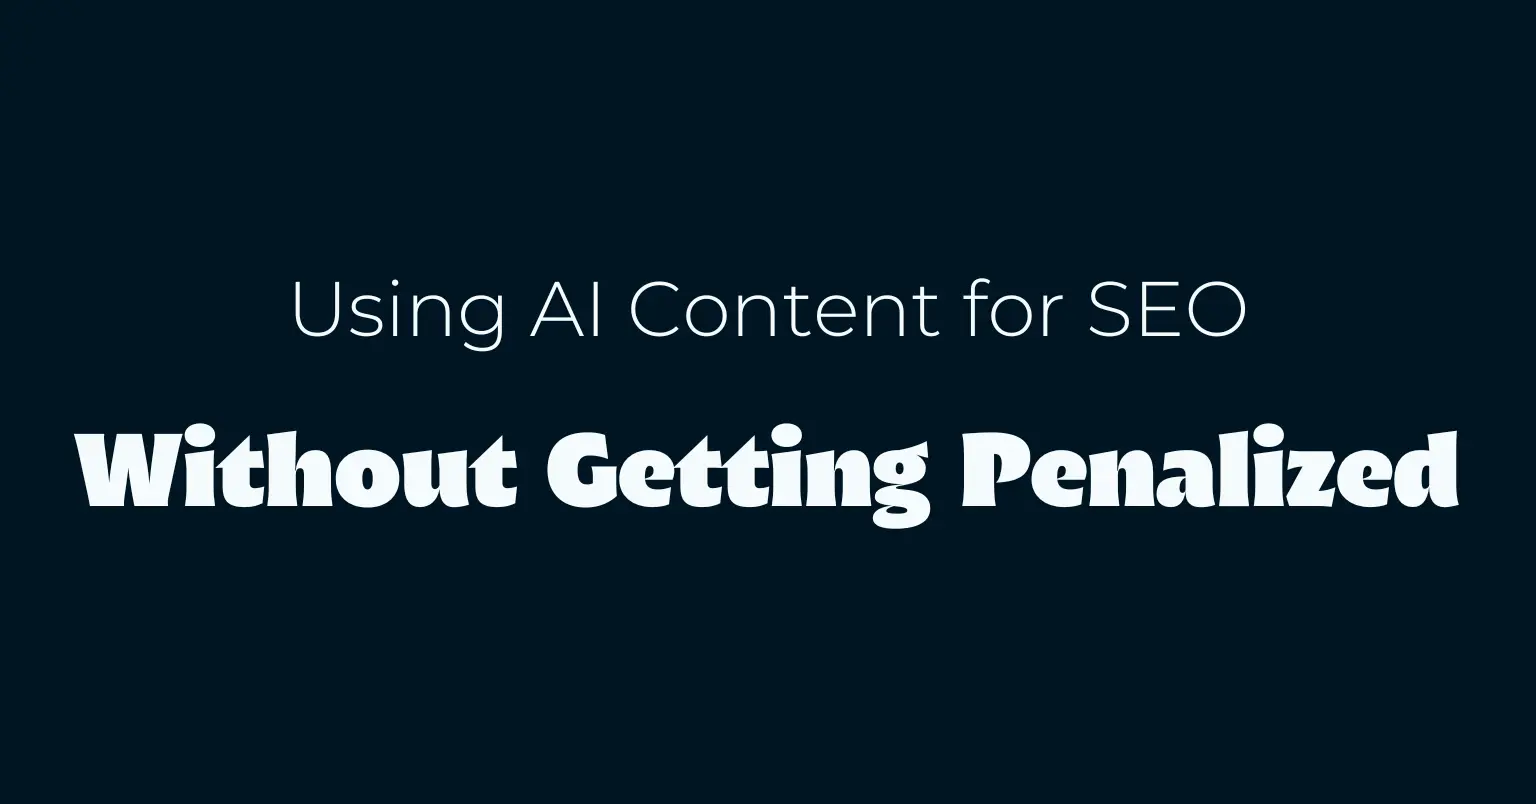 Using AI Content for SEO